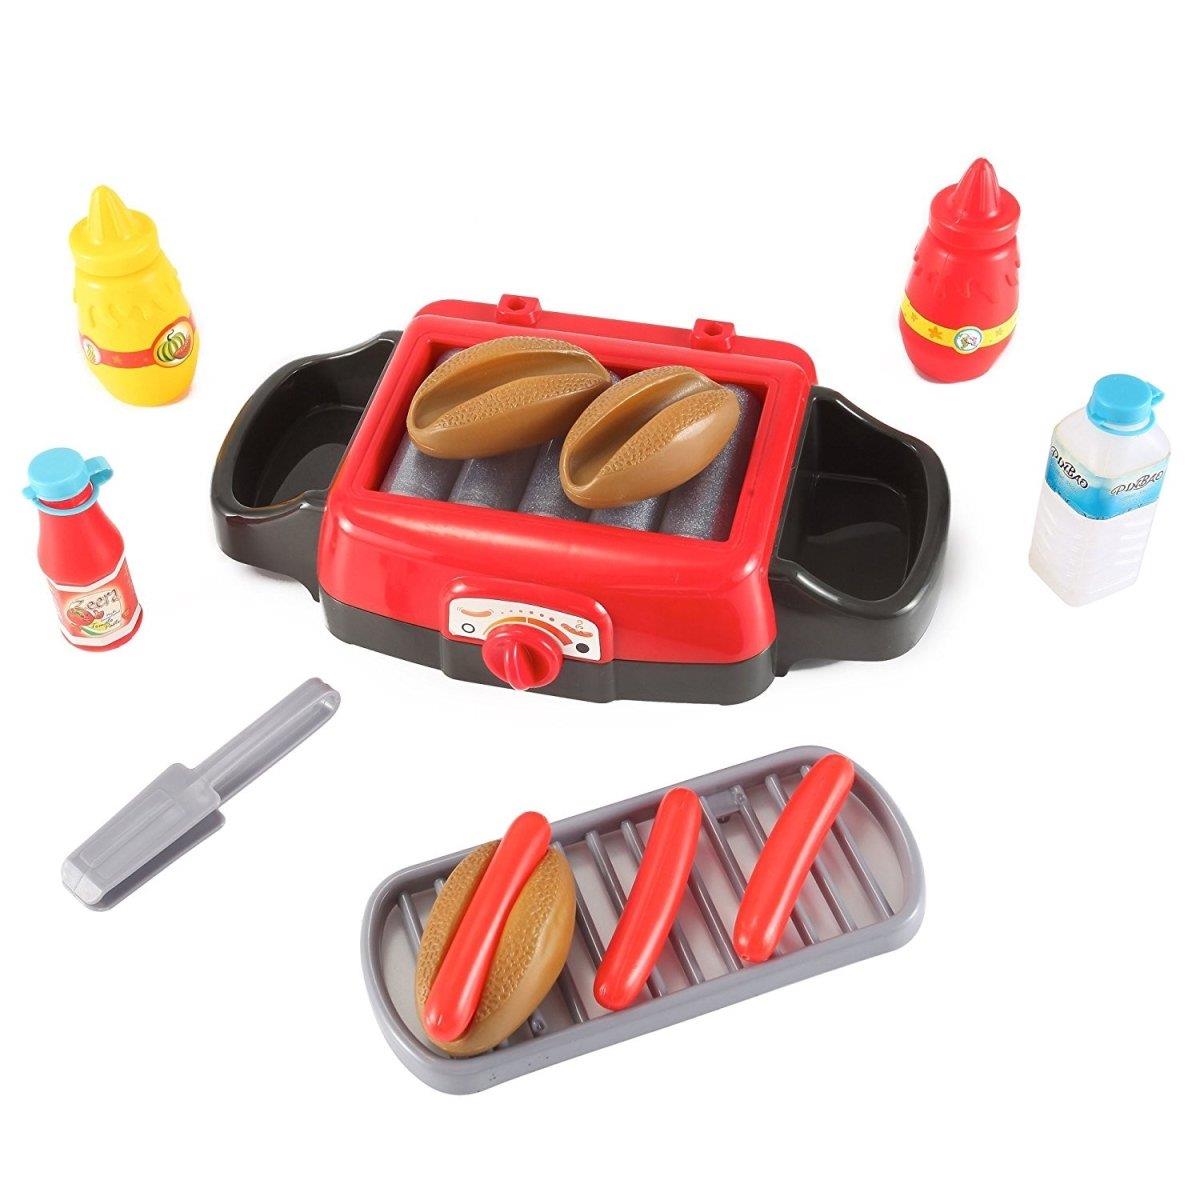 Ps28 Hot Dog Roller Grill Electric Stove Play Food Kitchen Appliance Set For Kids